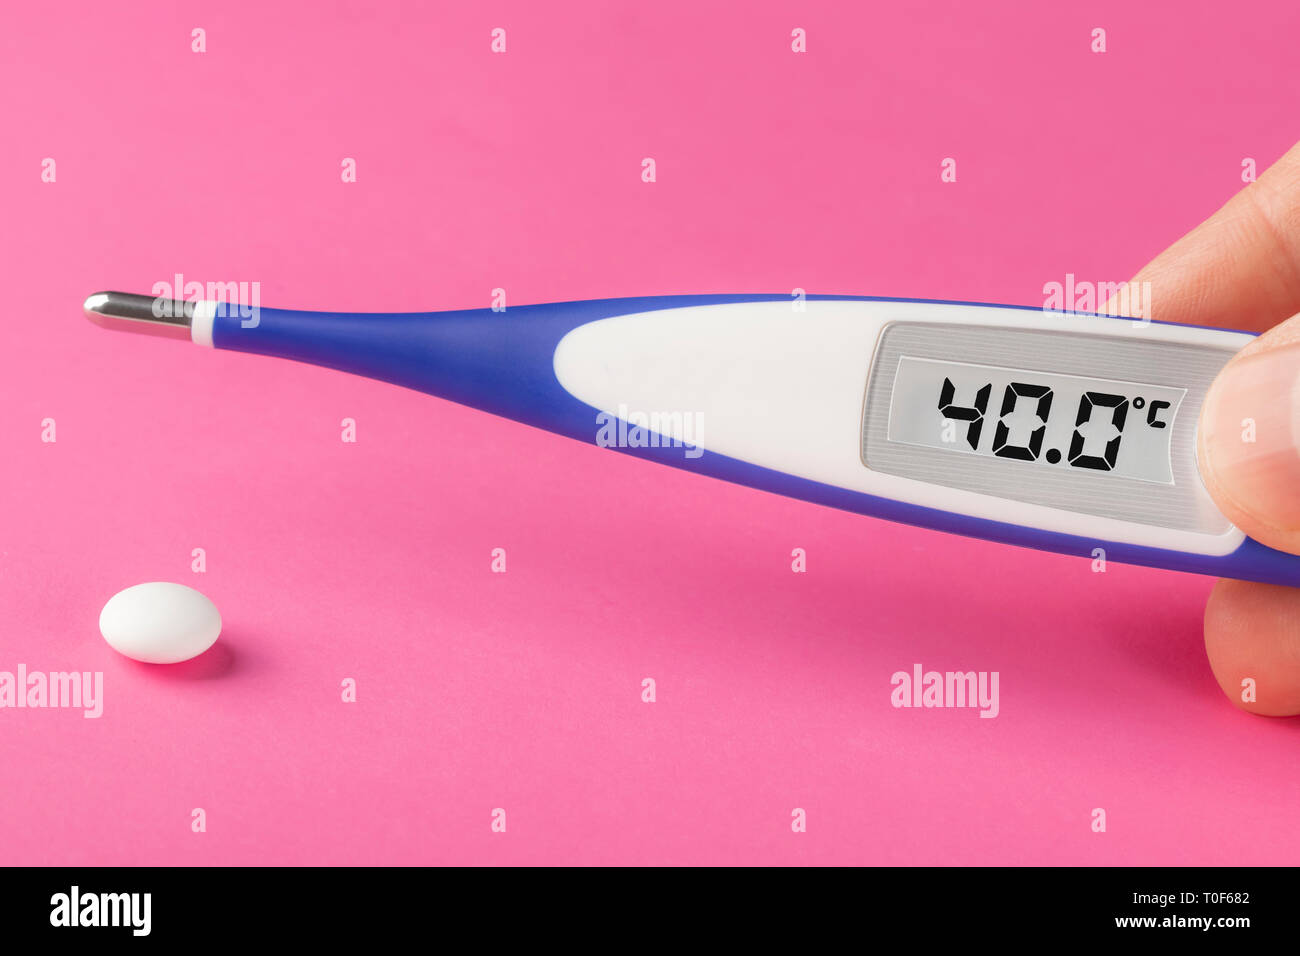 Electronic thermometer and pill on a pink background. High temperature 40 degrees Celsius on display. Copy space. Stock Photo